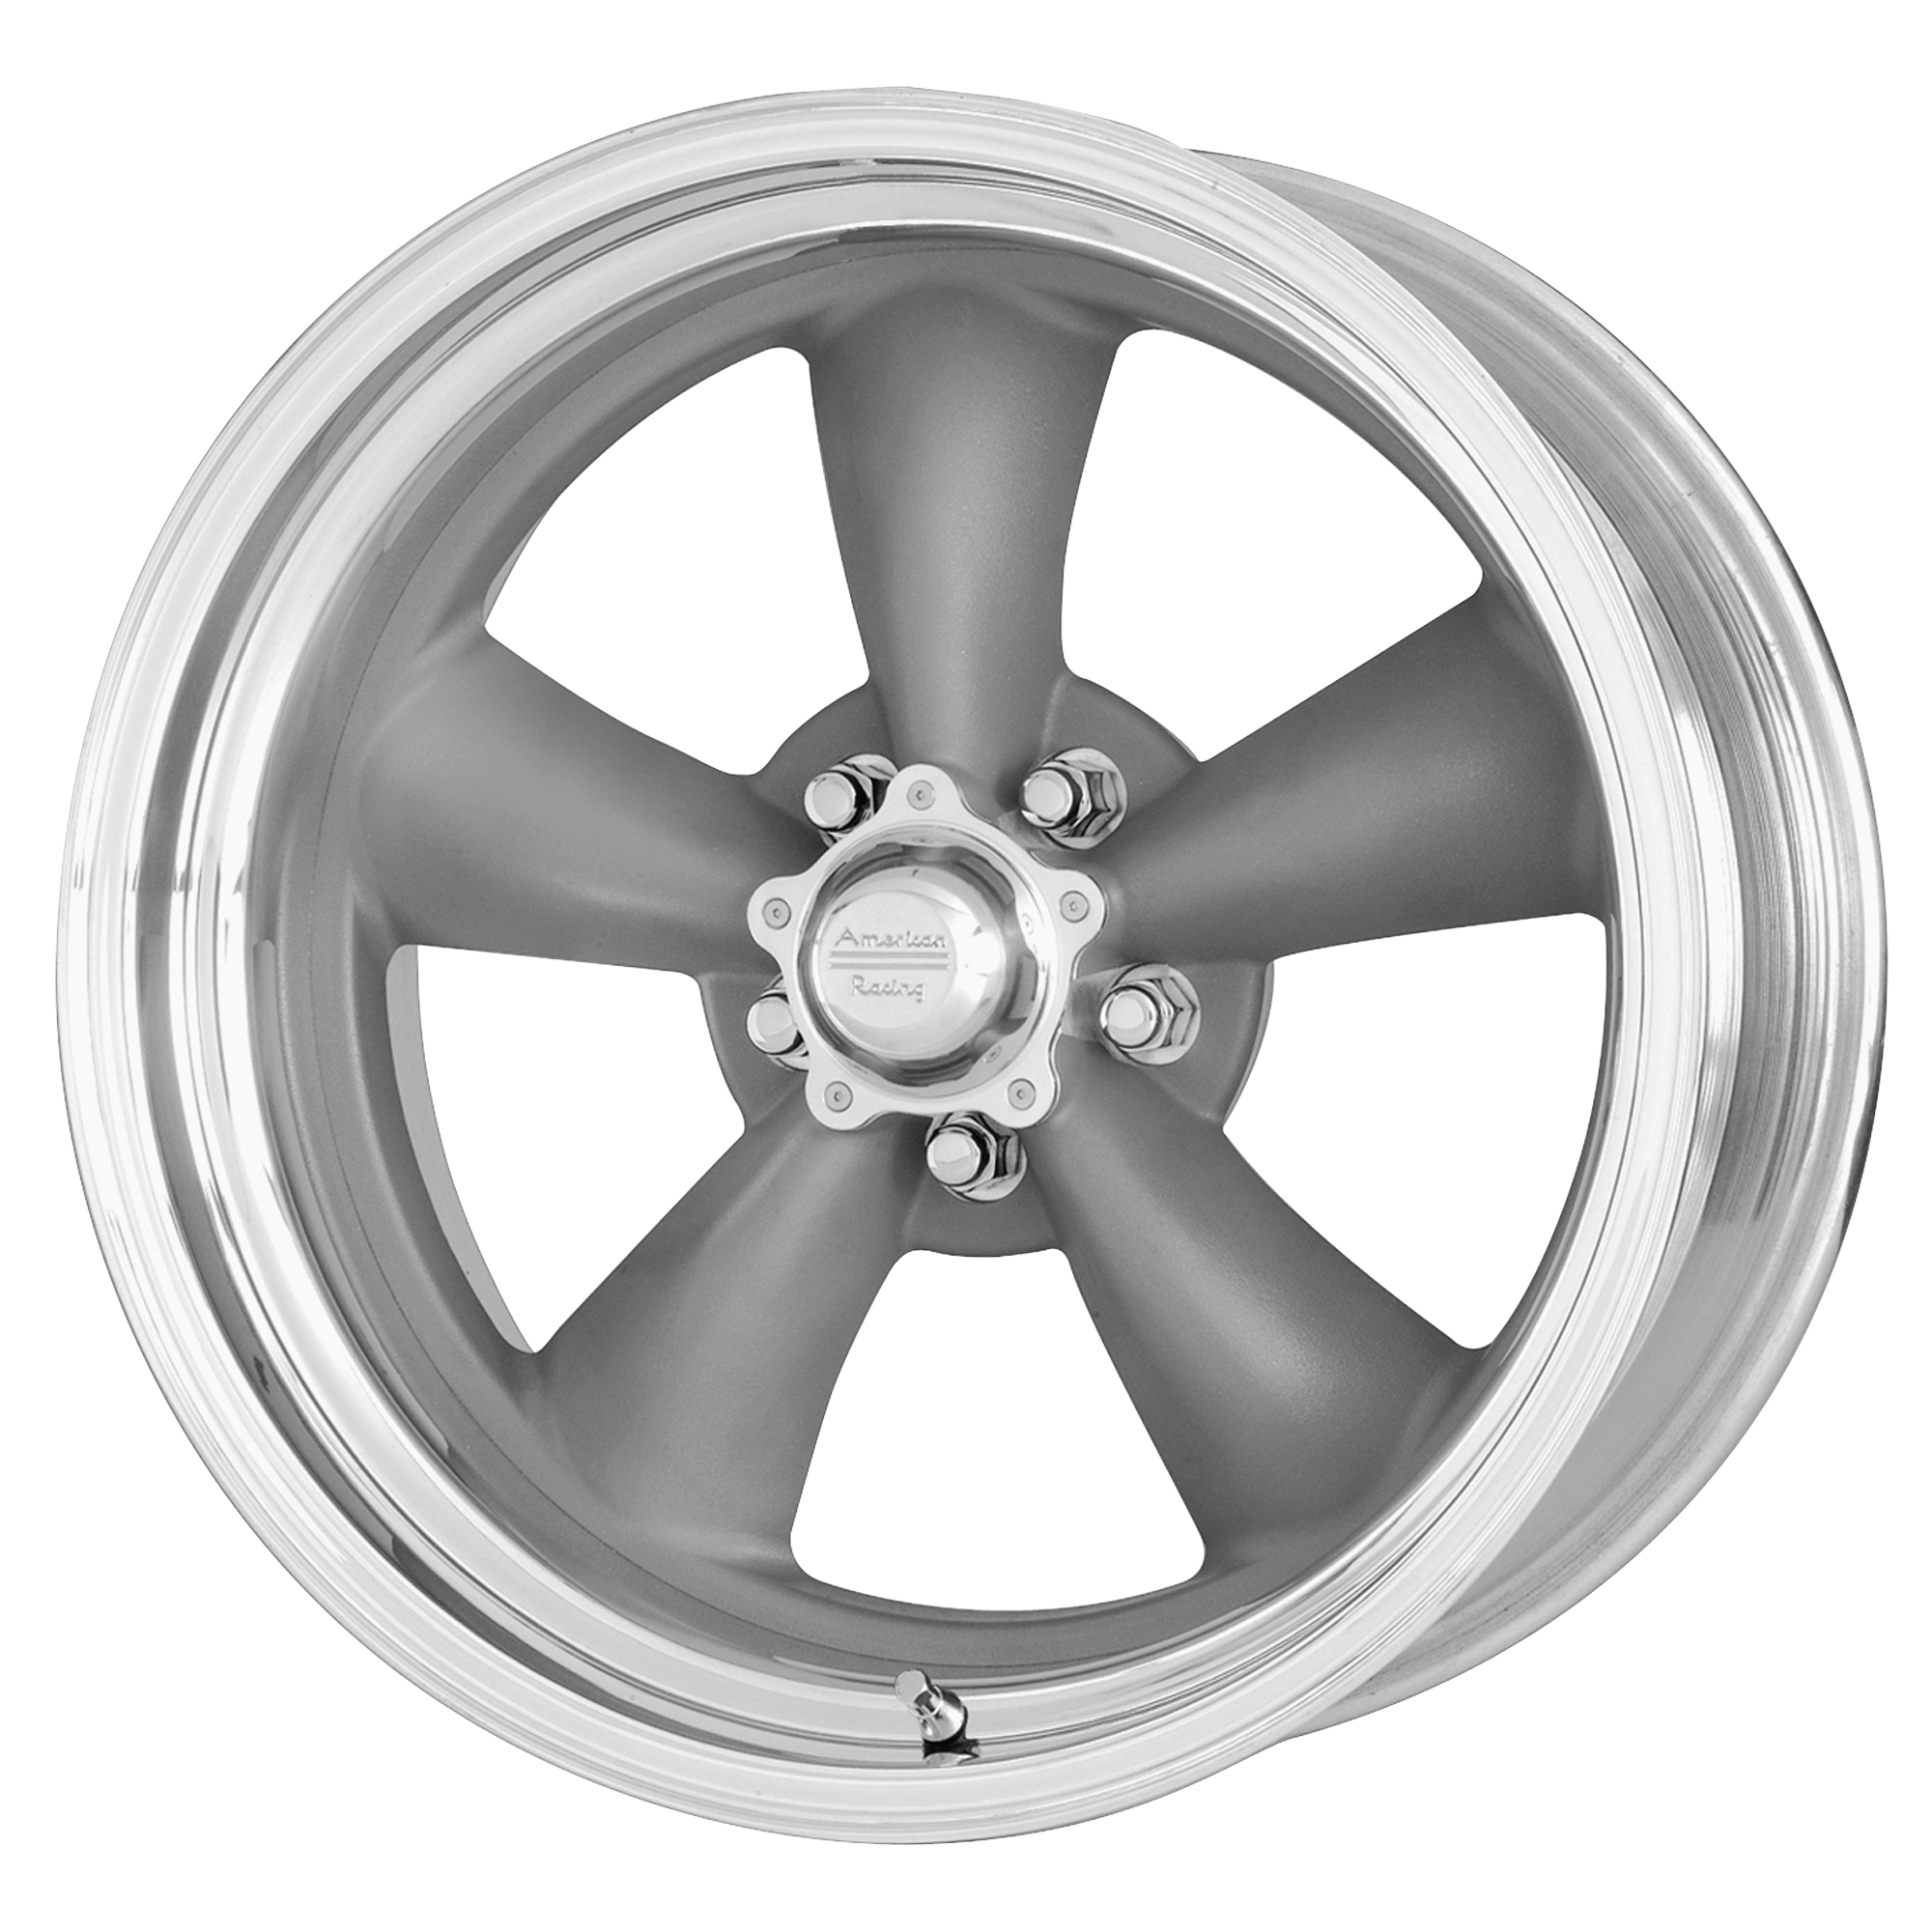 CLASSIC TORQ THRUST II ONE PIECE 15x8 5x120.65 MAG GRAY W/ MACHINED LIP (0 mm) - Tires and Engine Performance